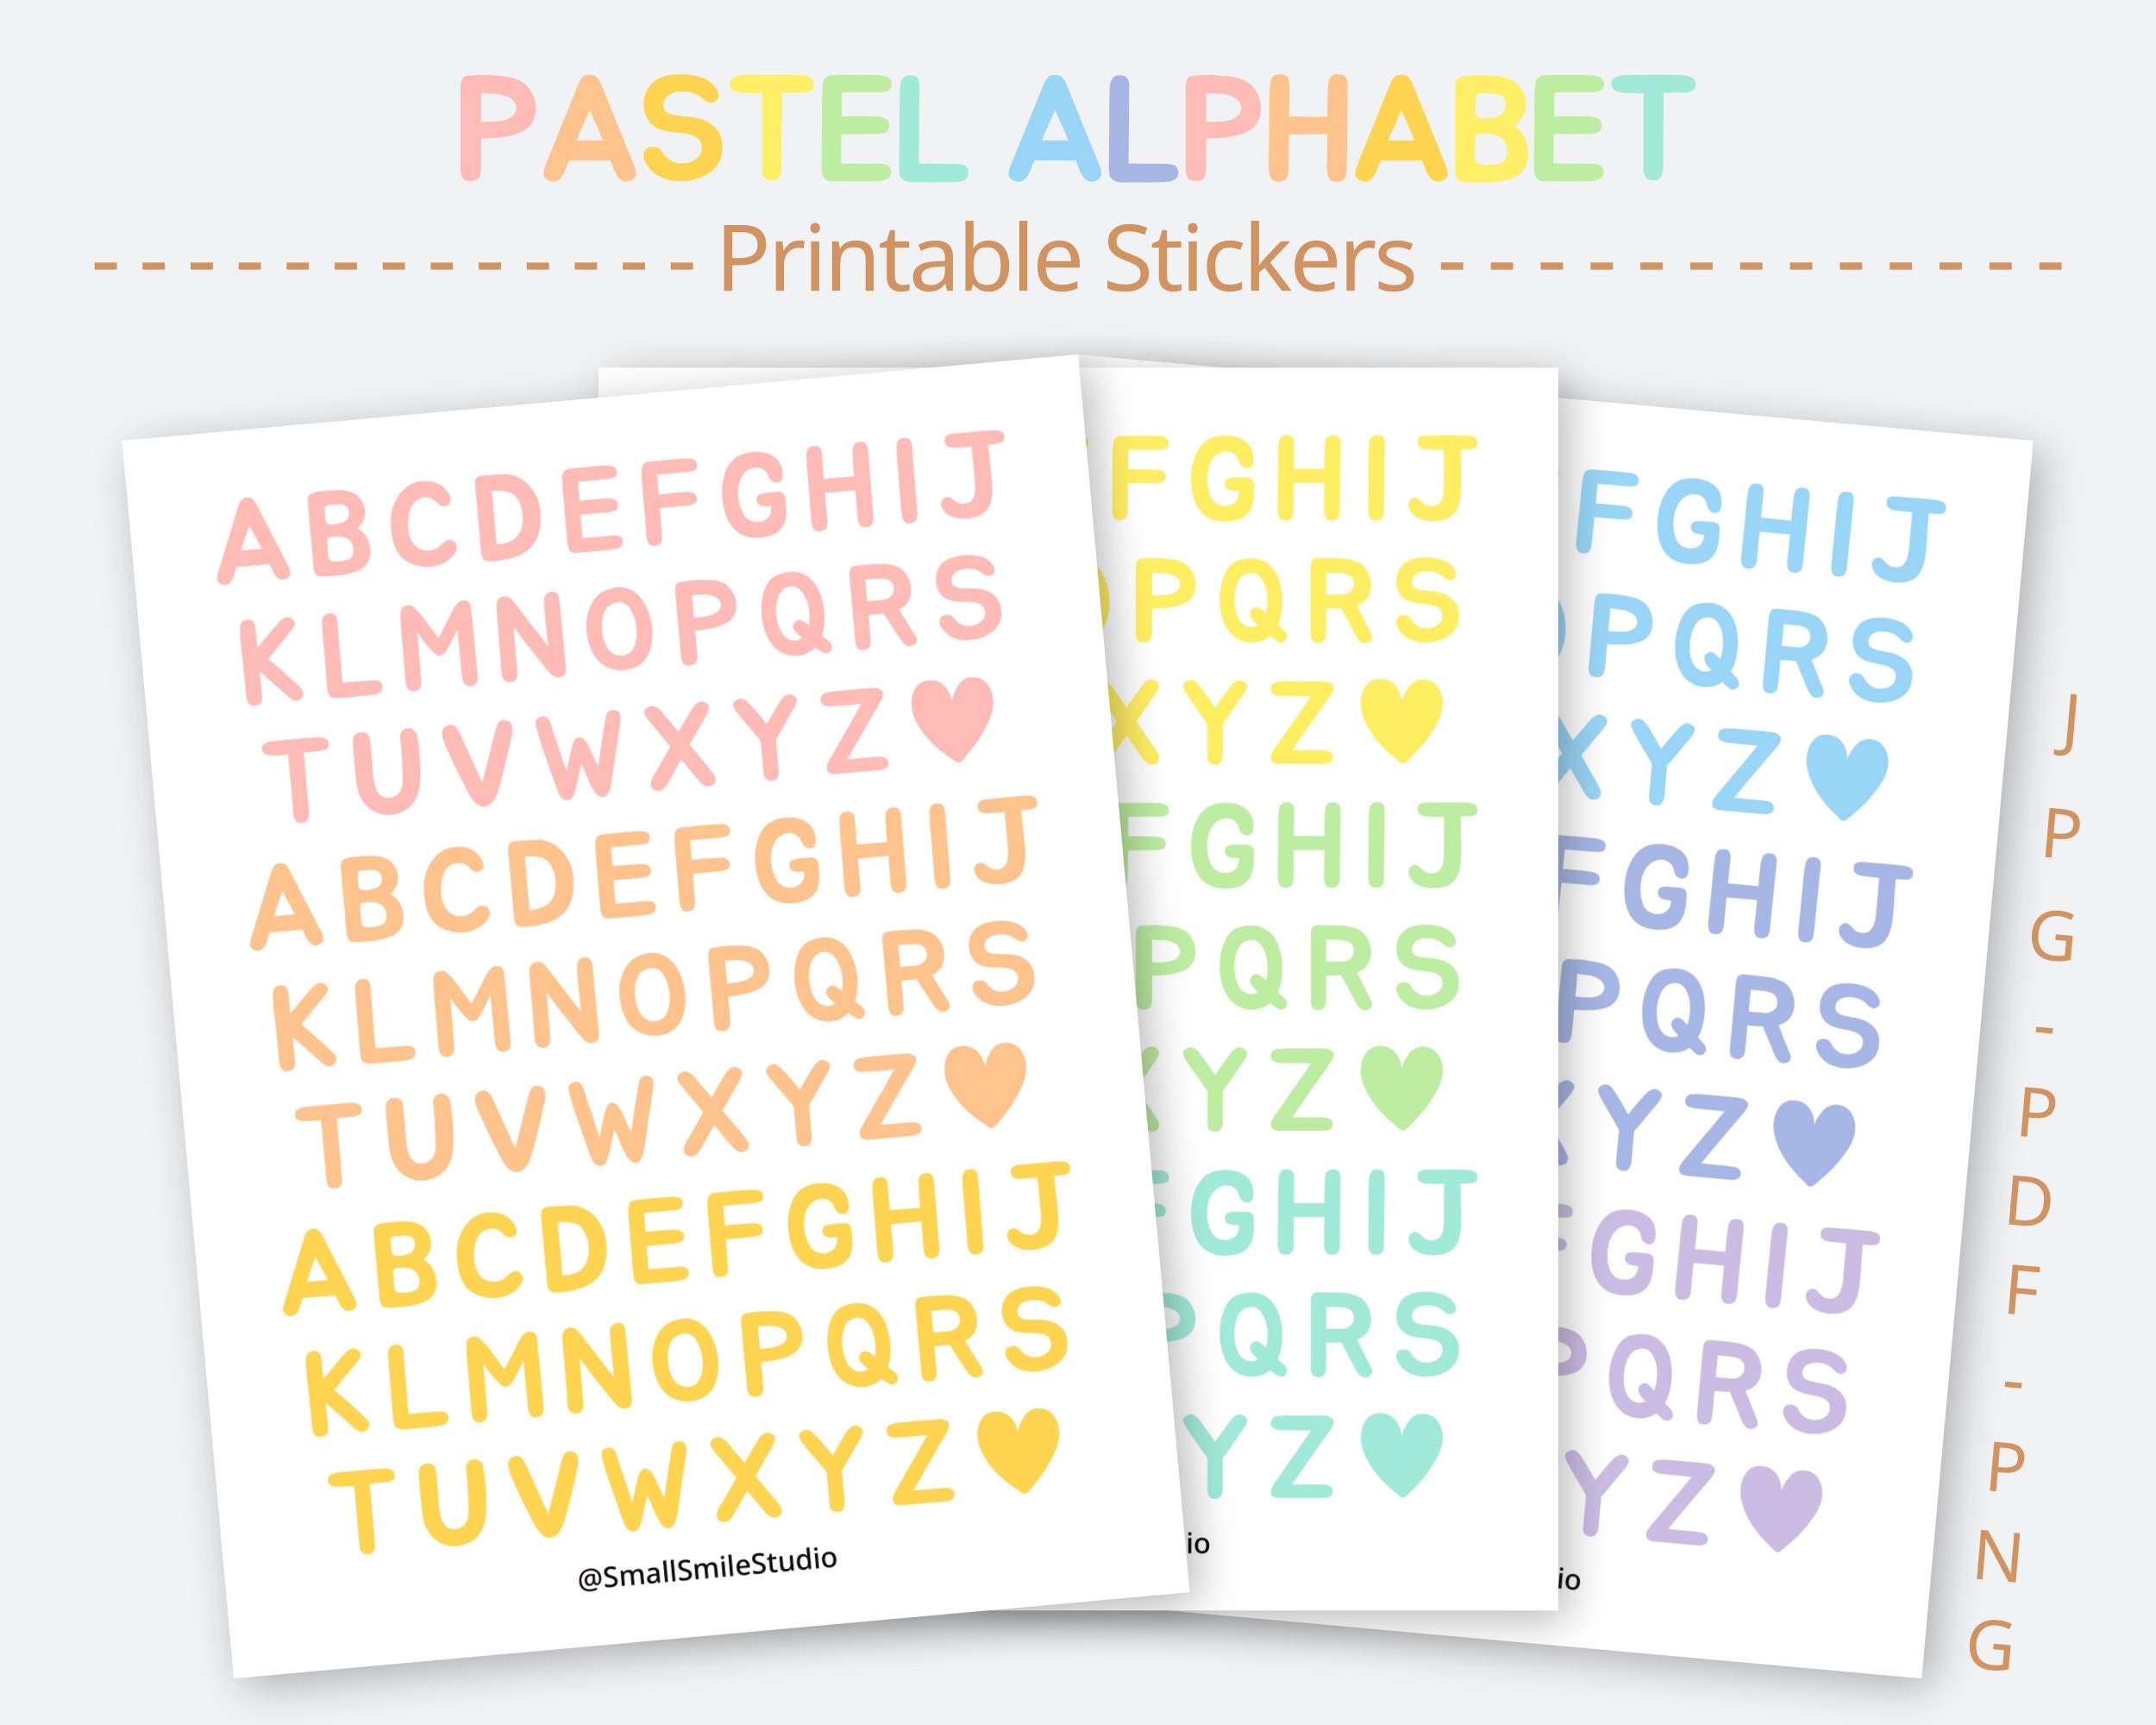 Pastel Alphabet Printable Stickers 3 Sheets Planner, Journal Stickers  Digital Instant Download Letter, A-Z, ABC, Rainbow 